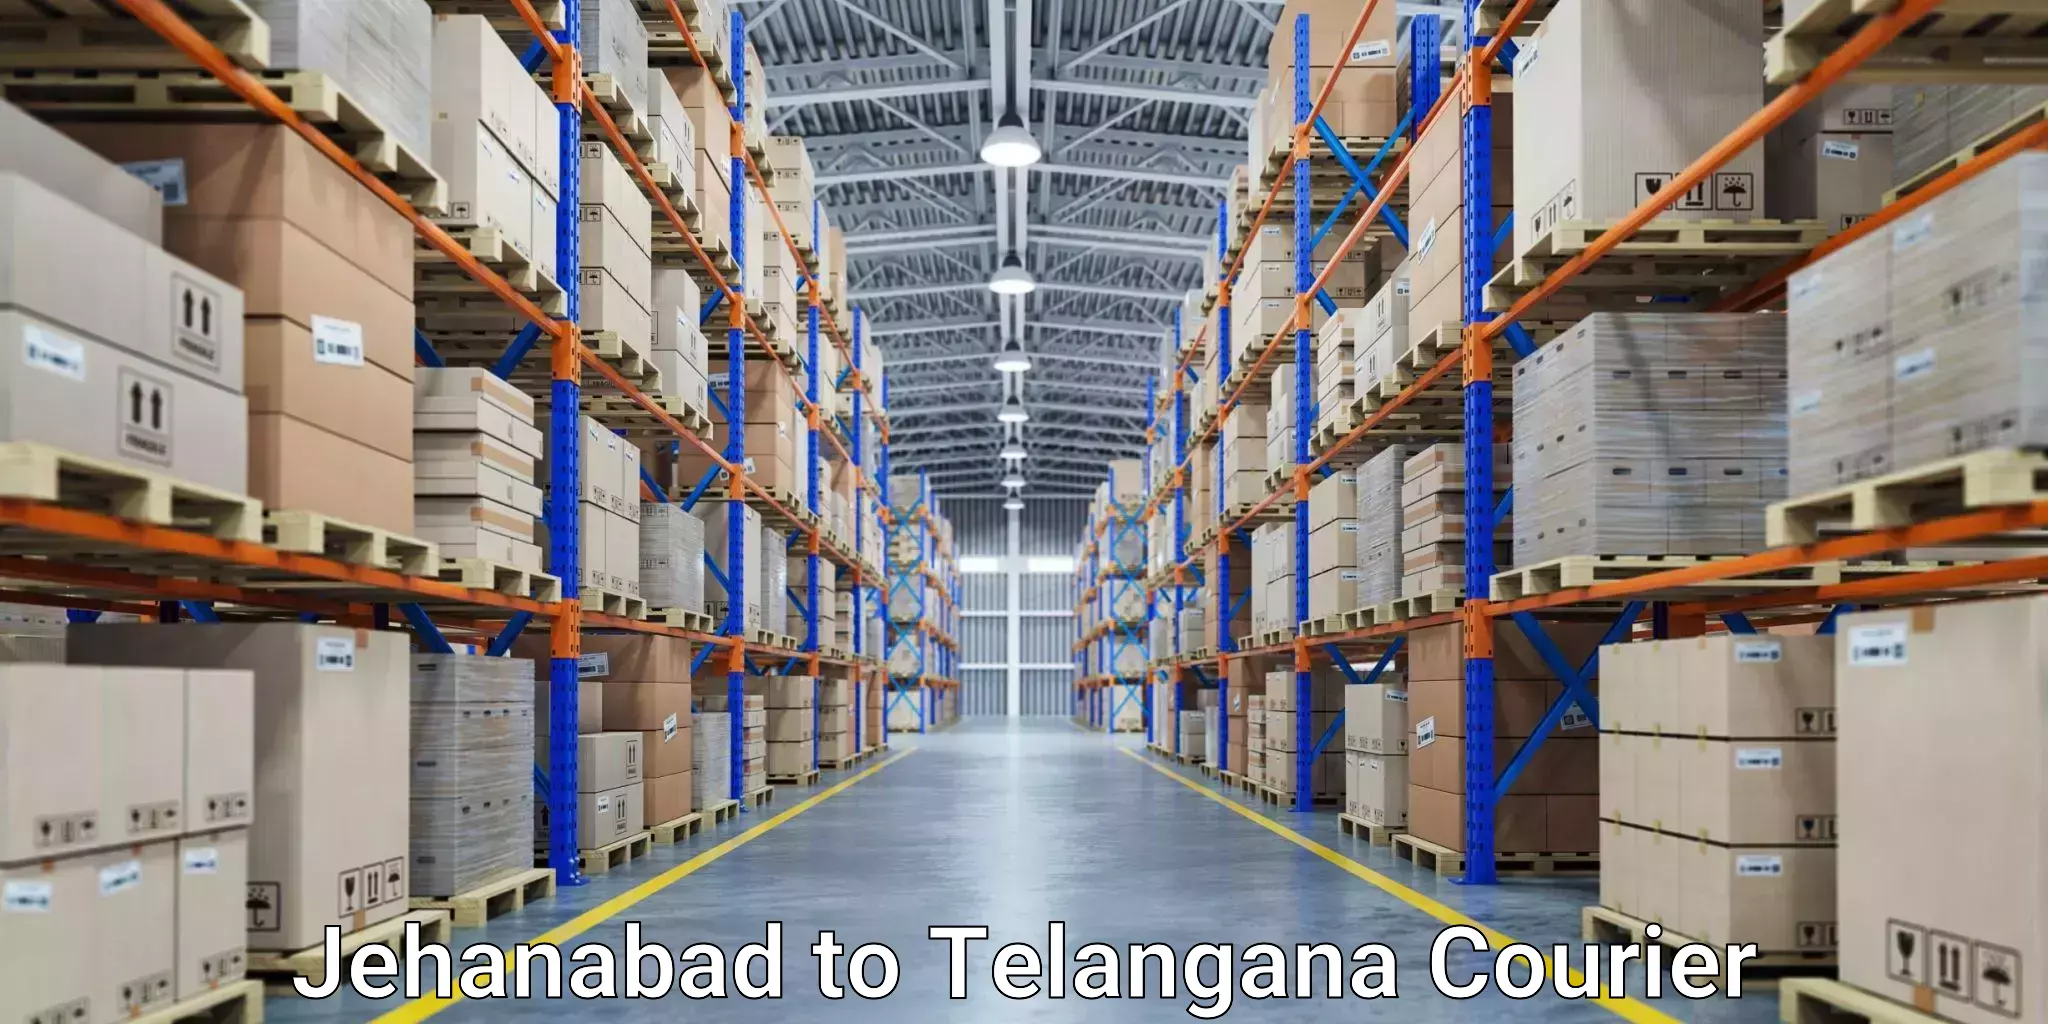 User-friendly delivery service Jehanabad to Telangana